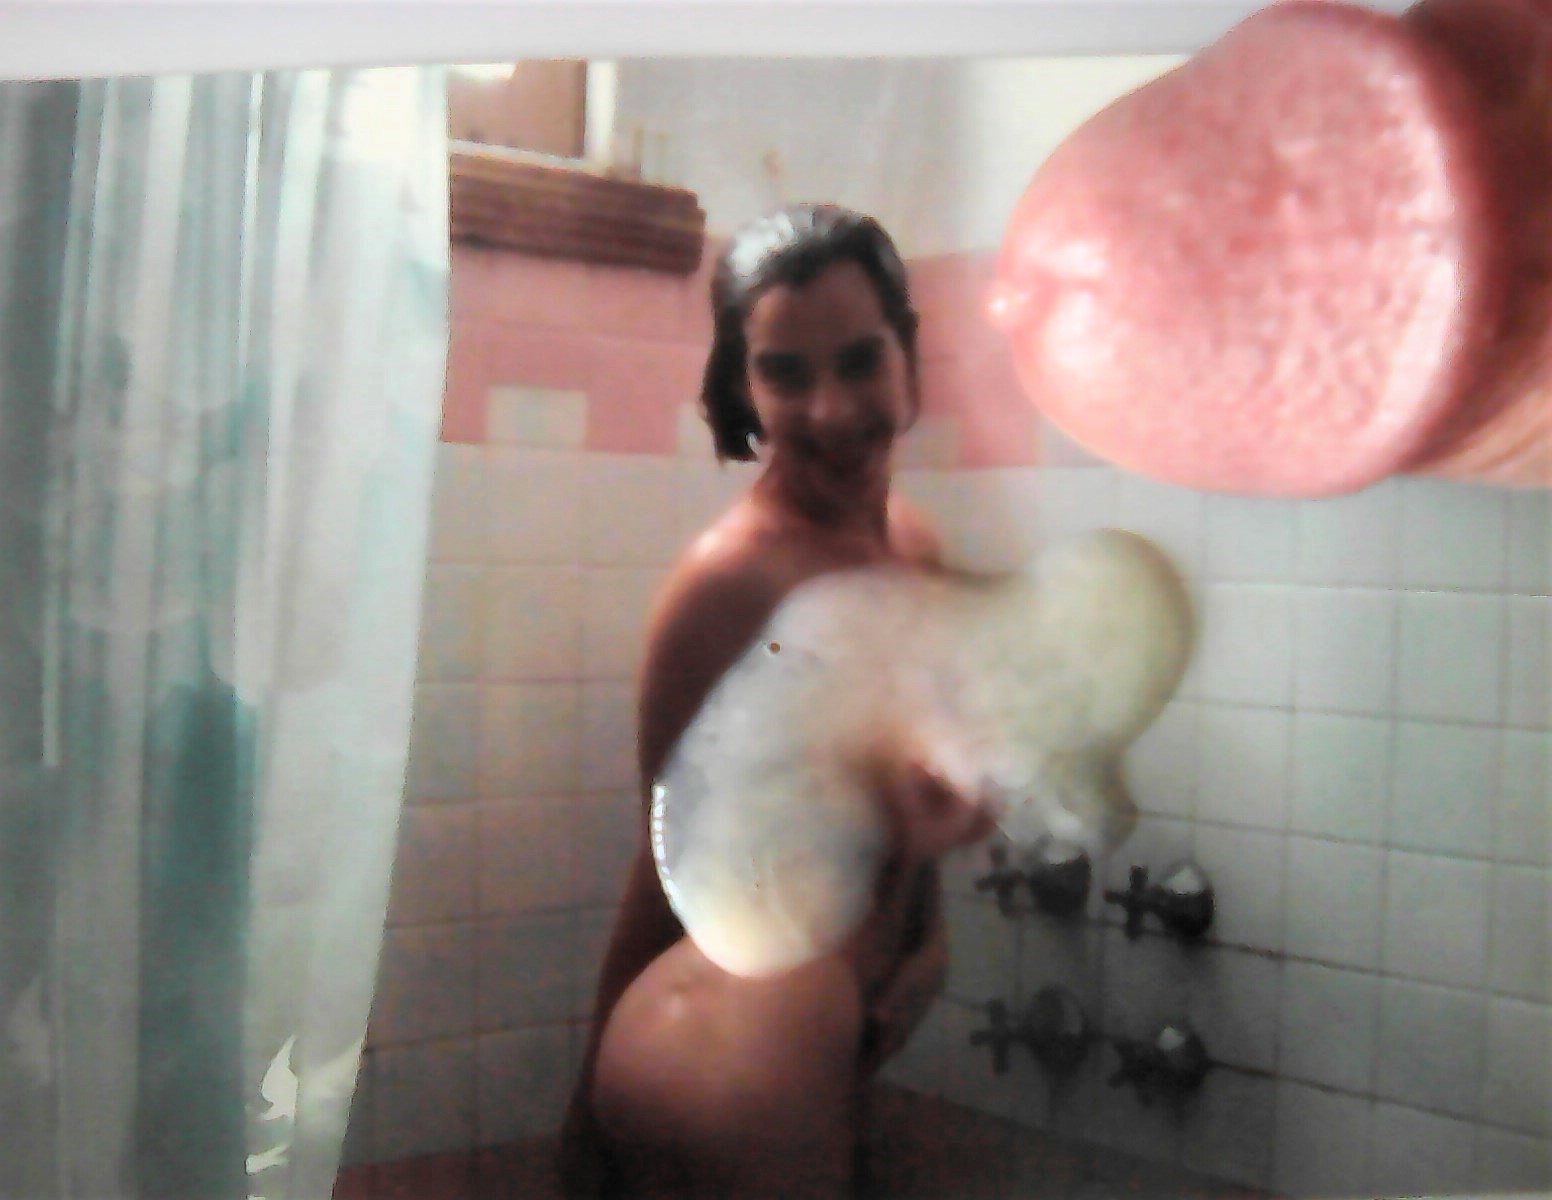 shower cute big boobs hairy pussy pics & tribute